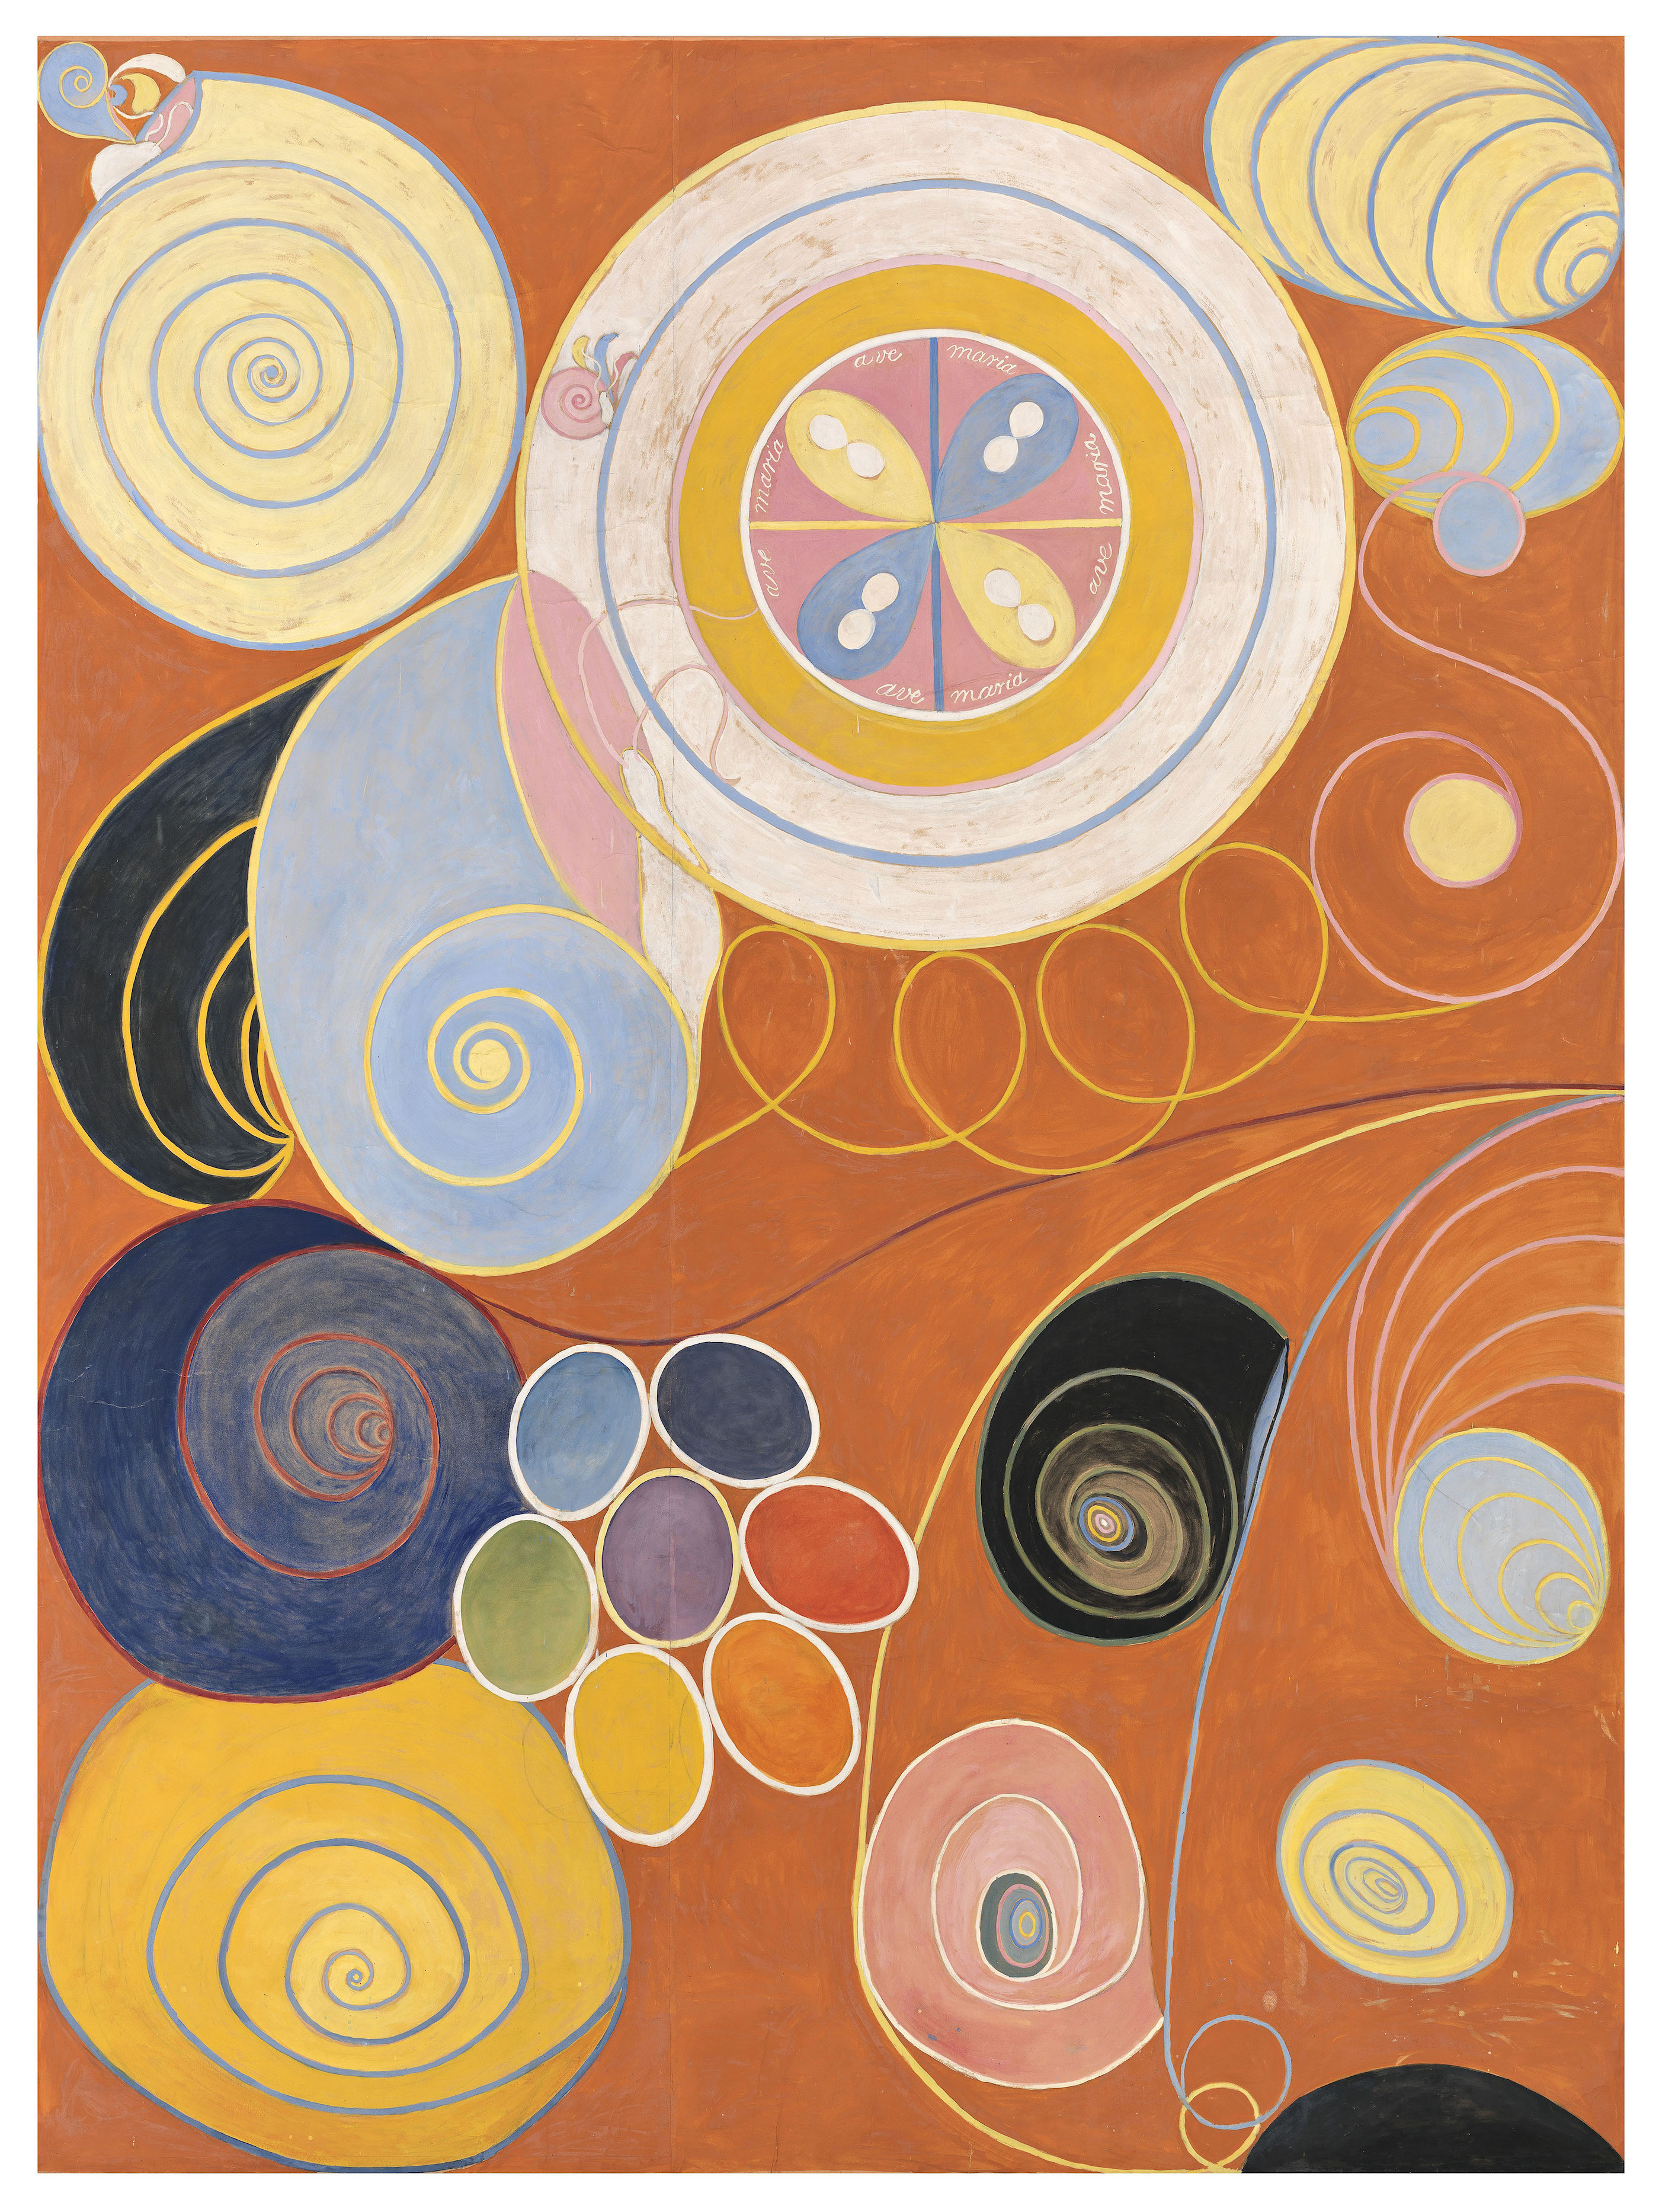 The Ten Largest, No. 3, Youth, Group IV by Hilma af Klint - 1907年 